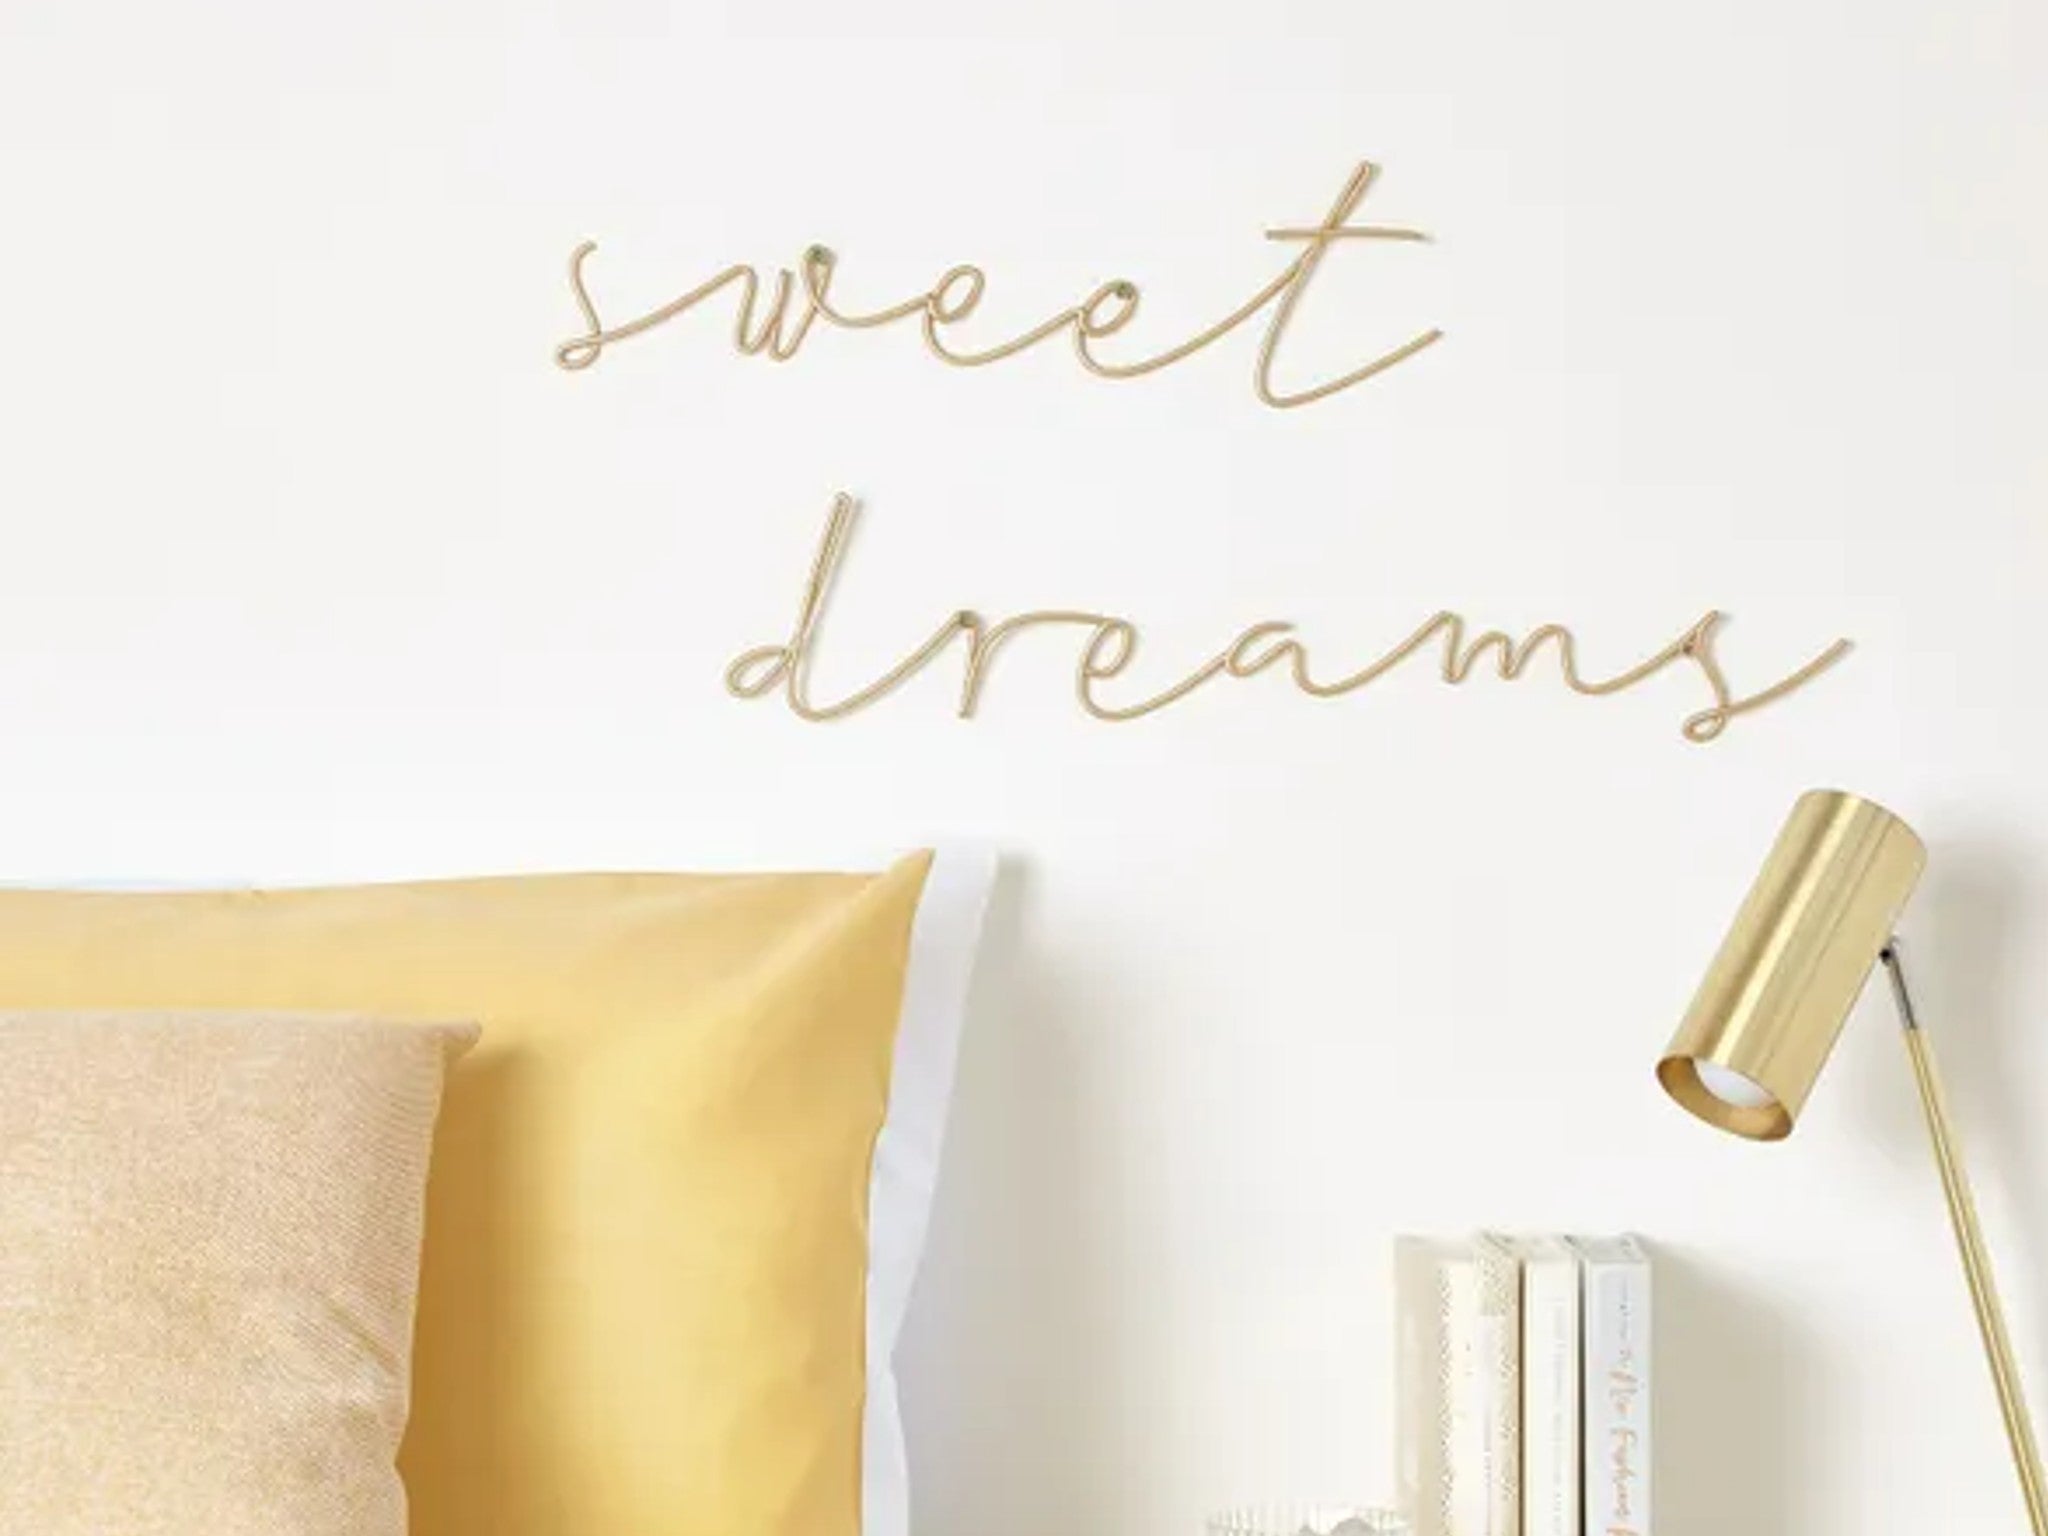 Sweet dreams gold metal wire sign